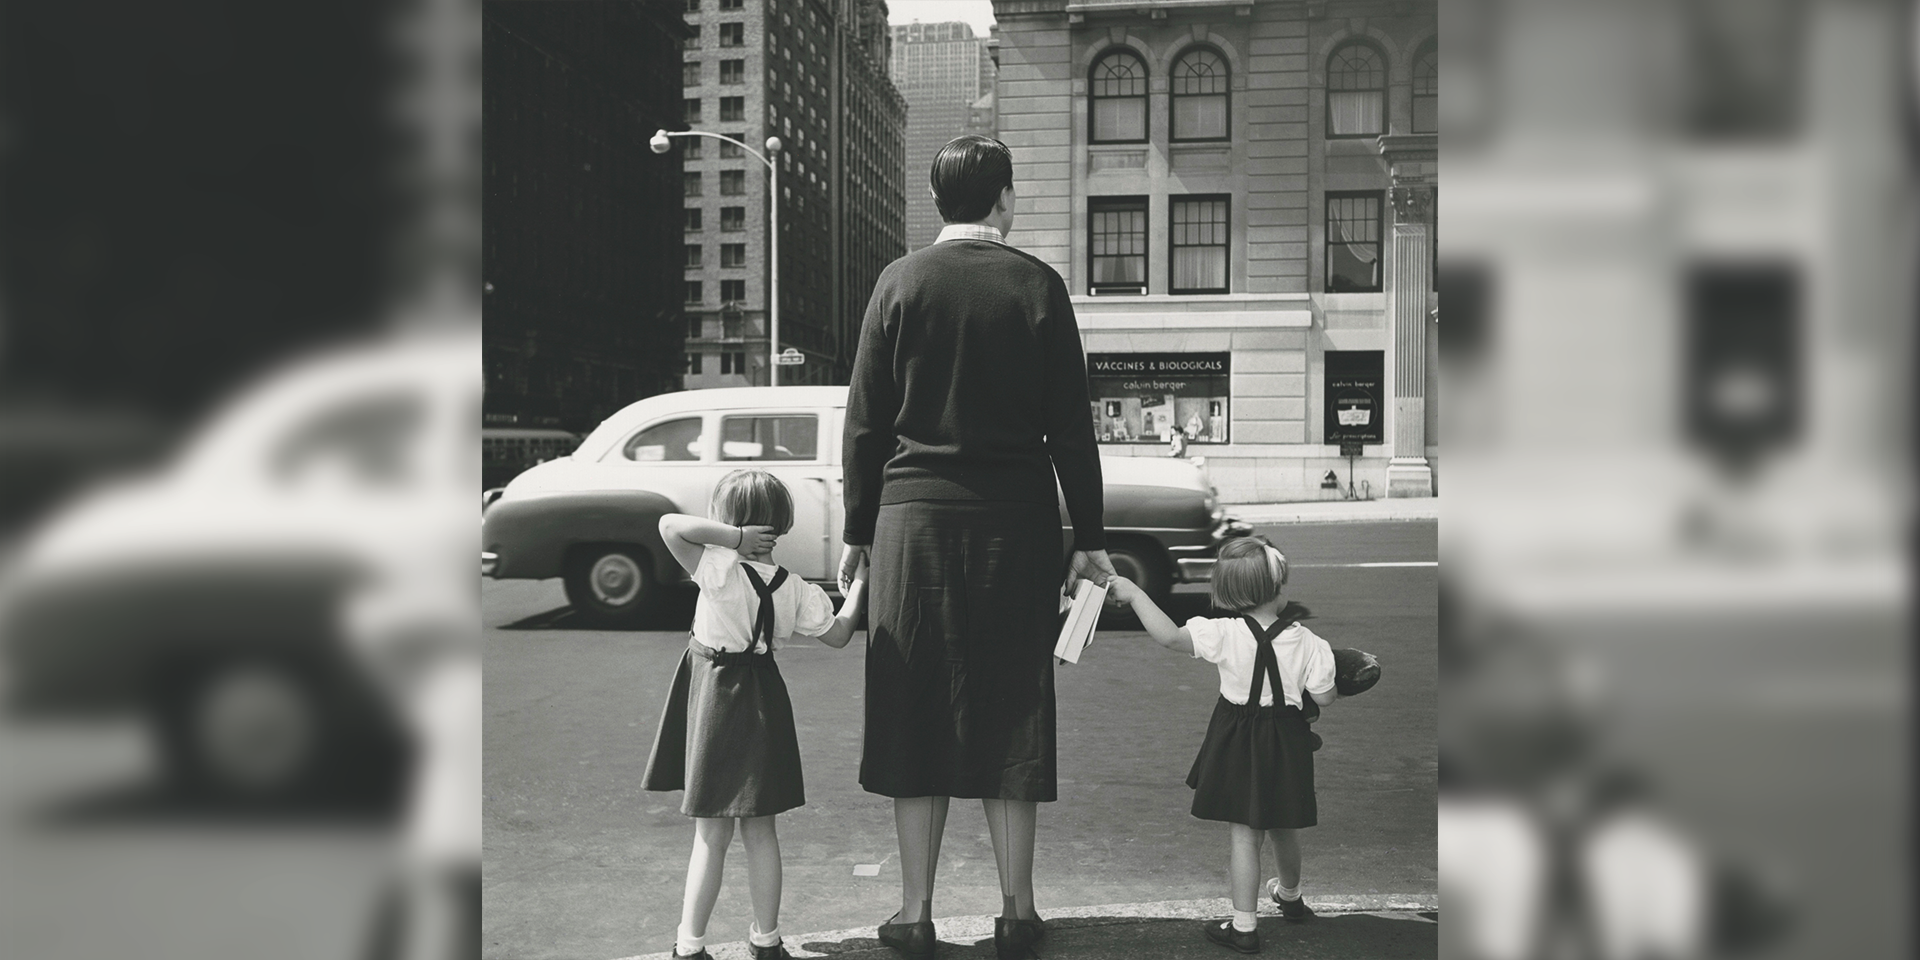 New York, 1954 Tirage argentique, 2012 ©Estate of Vivian Maier, Courtesy of Maloof Collection and Howard Greenberg Gallery, NY